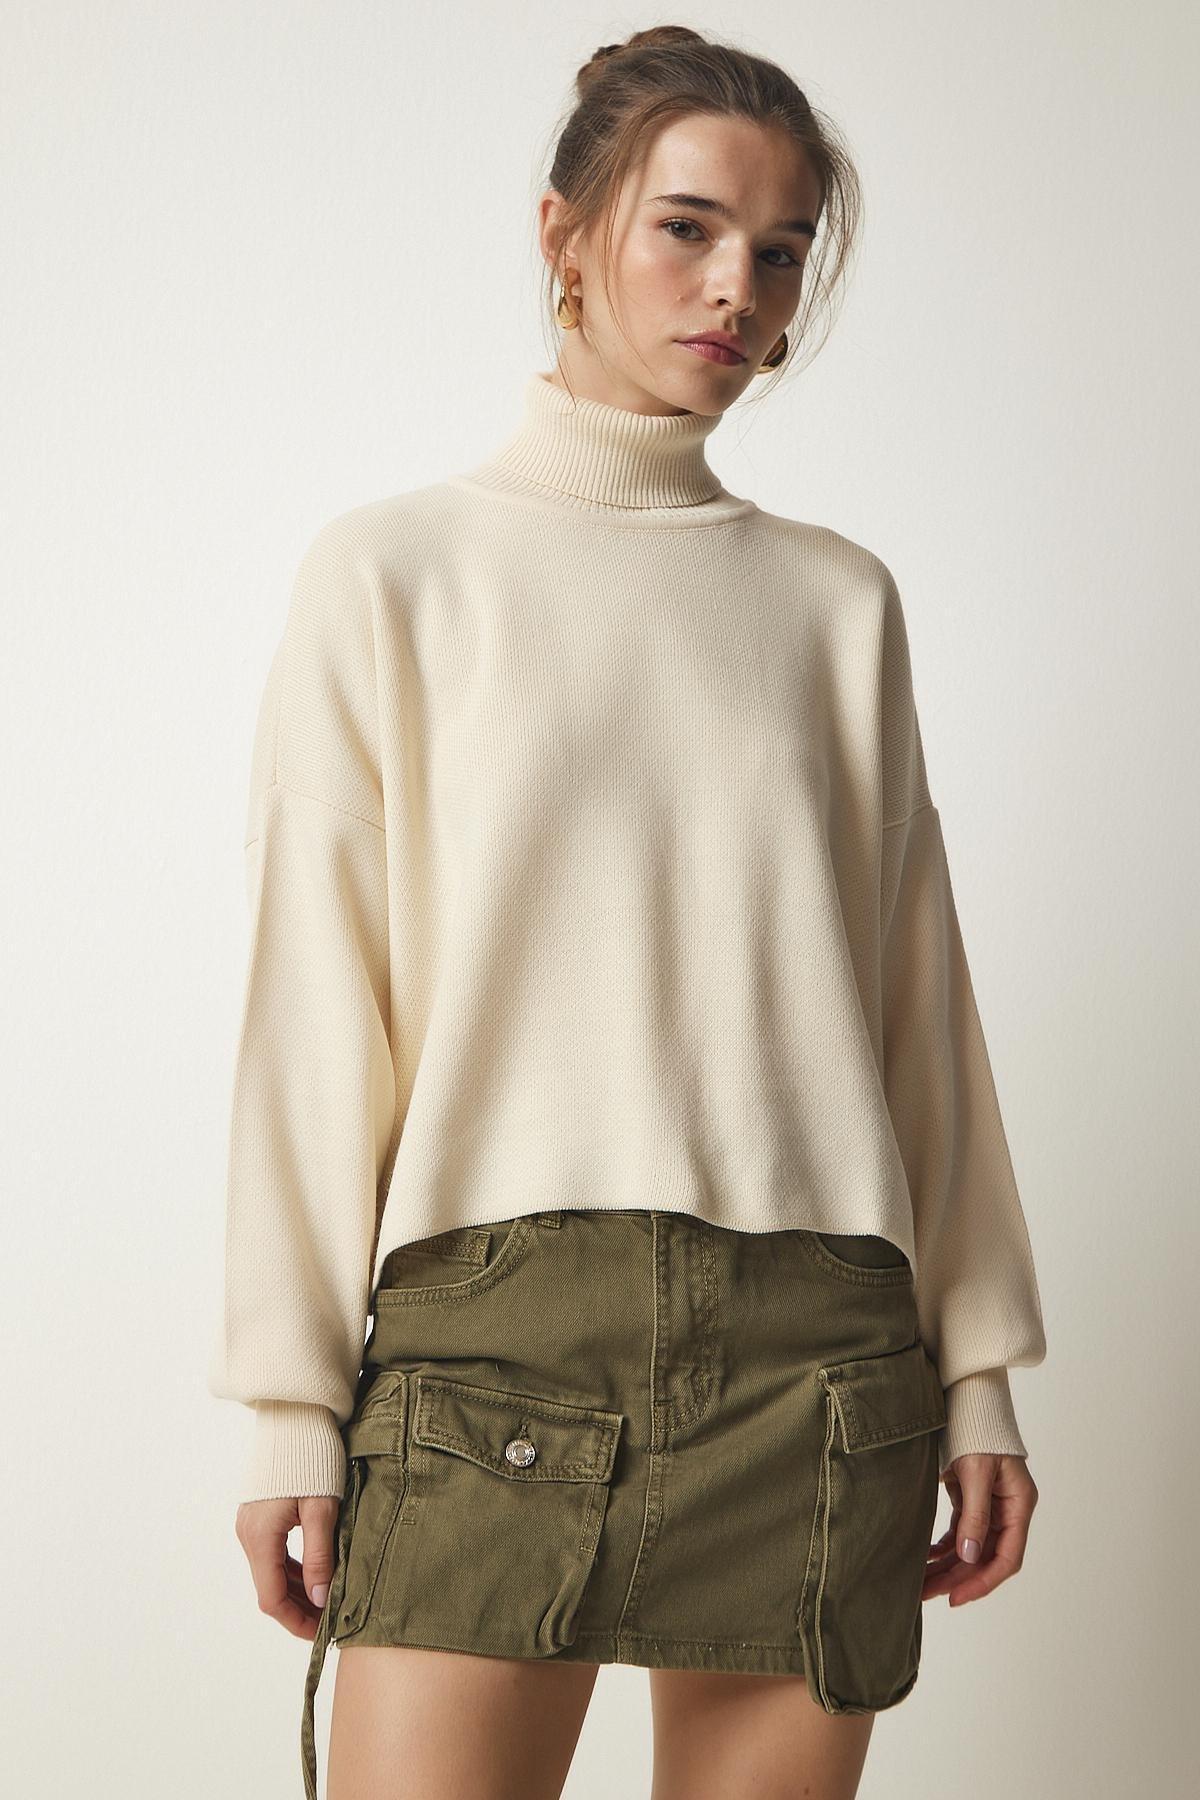 Happiness Istanbul - Cream Turtleneck Casual Knitwear Sweater